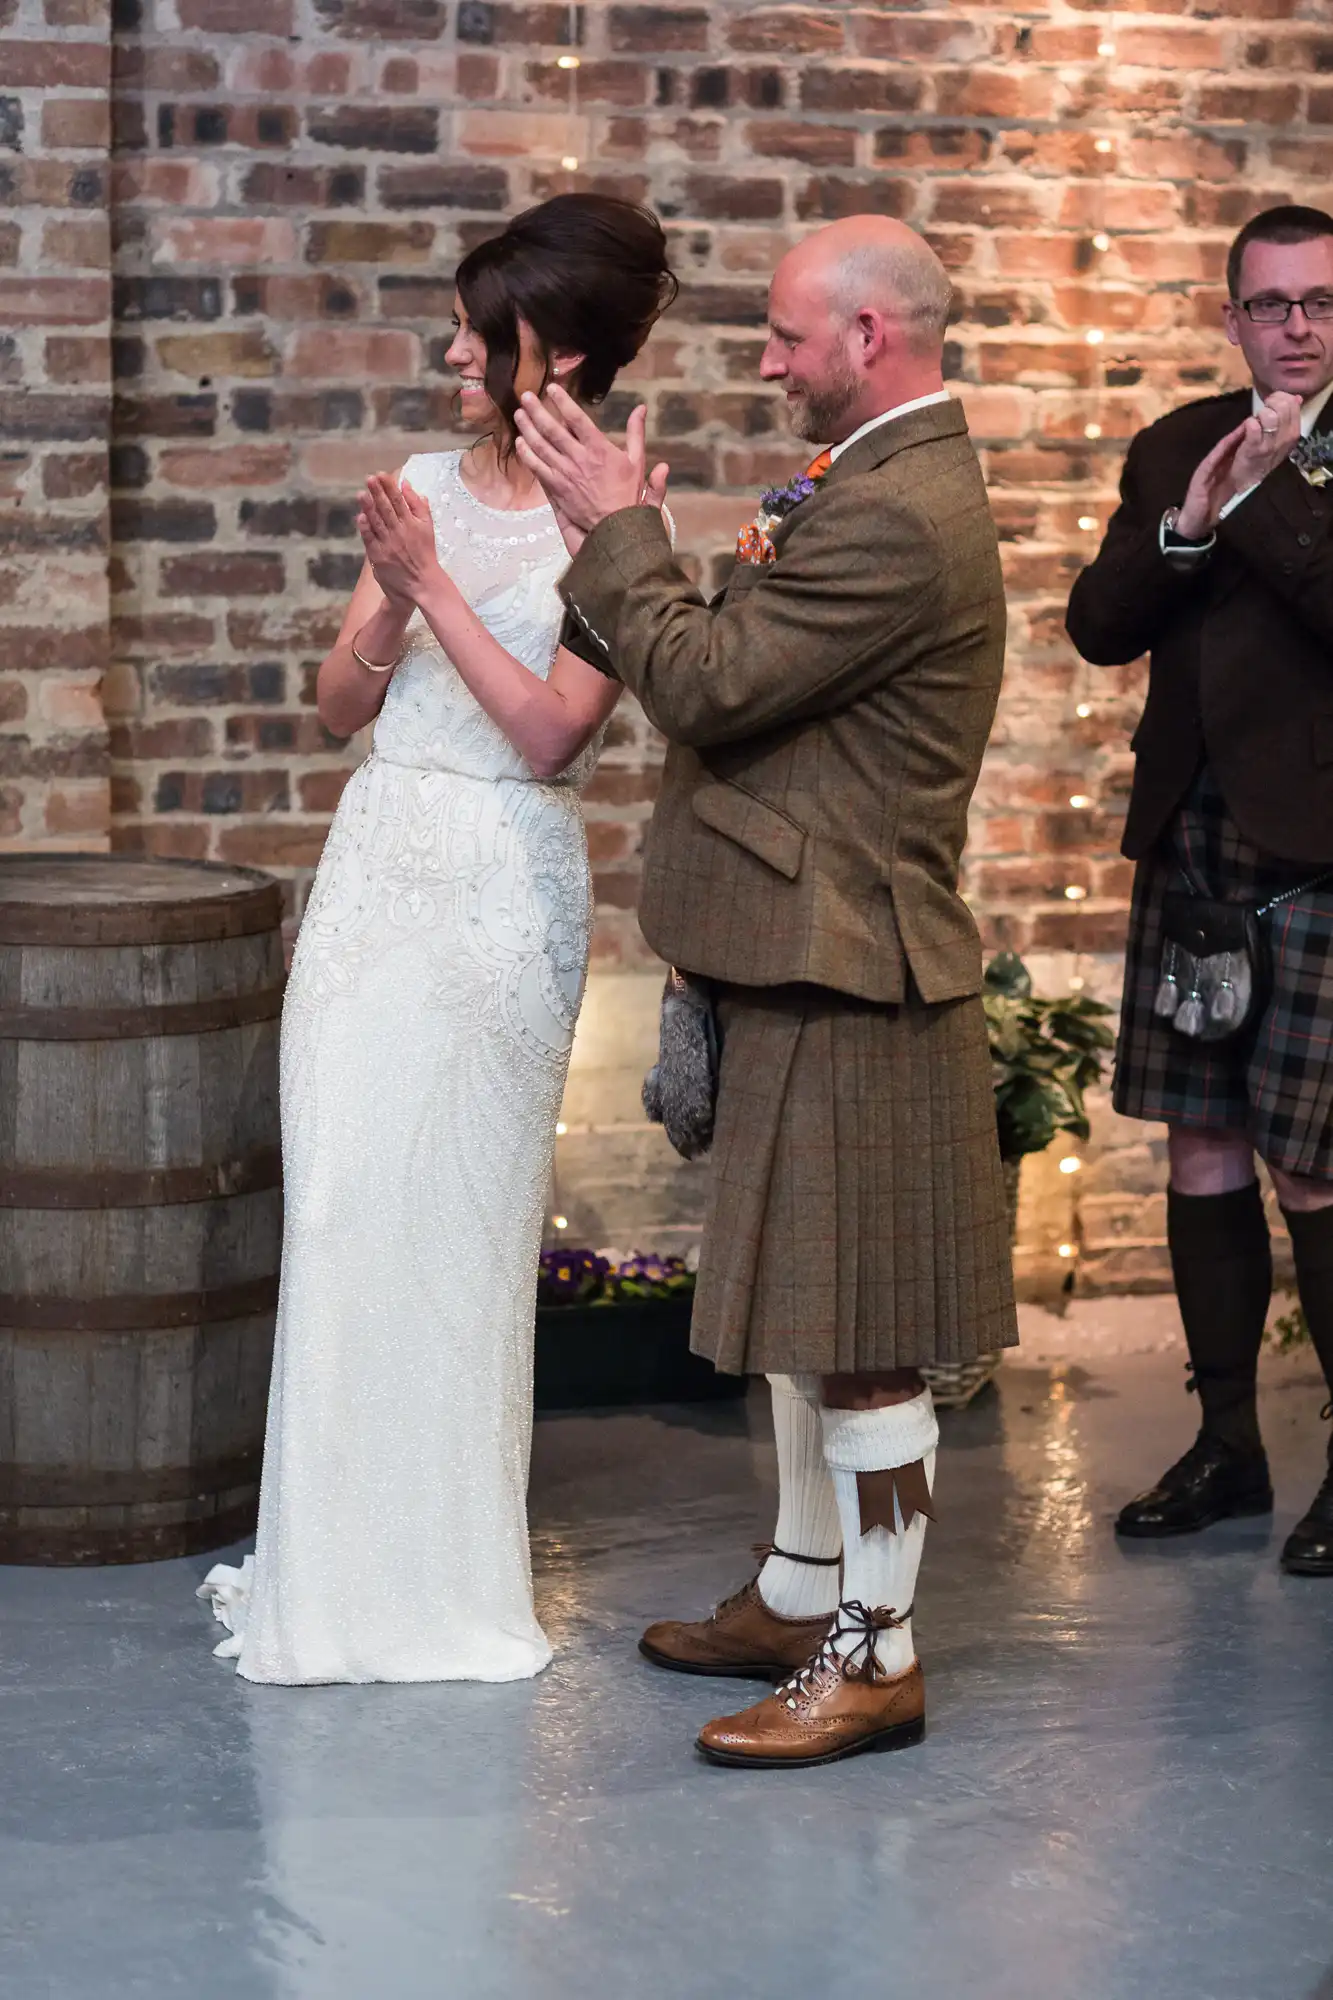 A bride and groom, the groom in a traditional kilt, embrace and admire the bride's ring during a wedding ceremony in a room with brick walls and barrels.